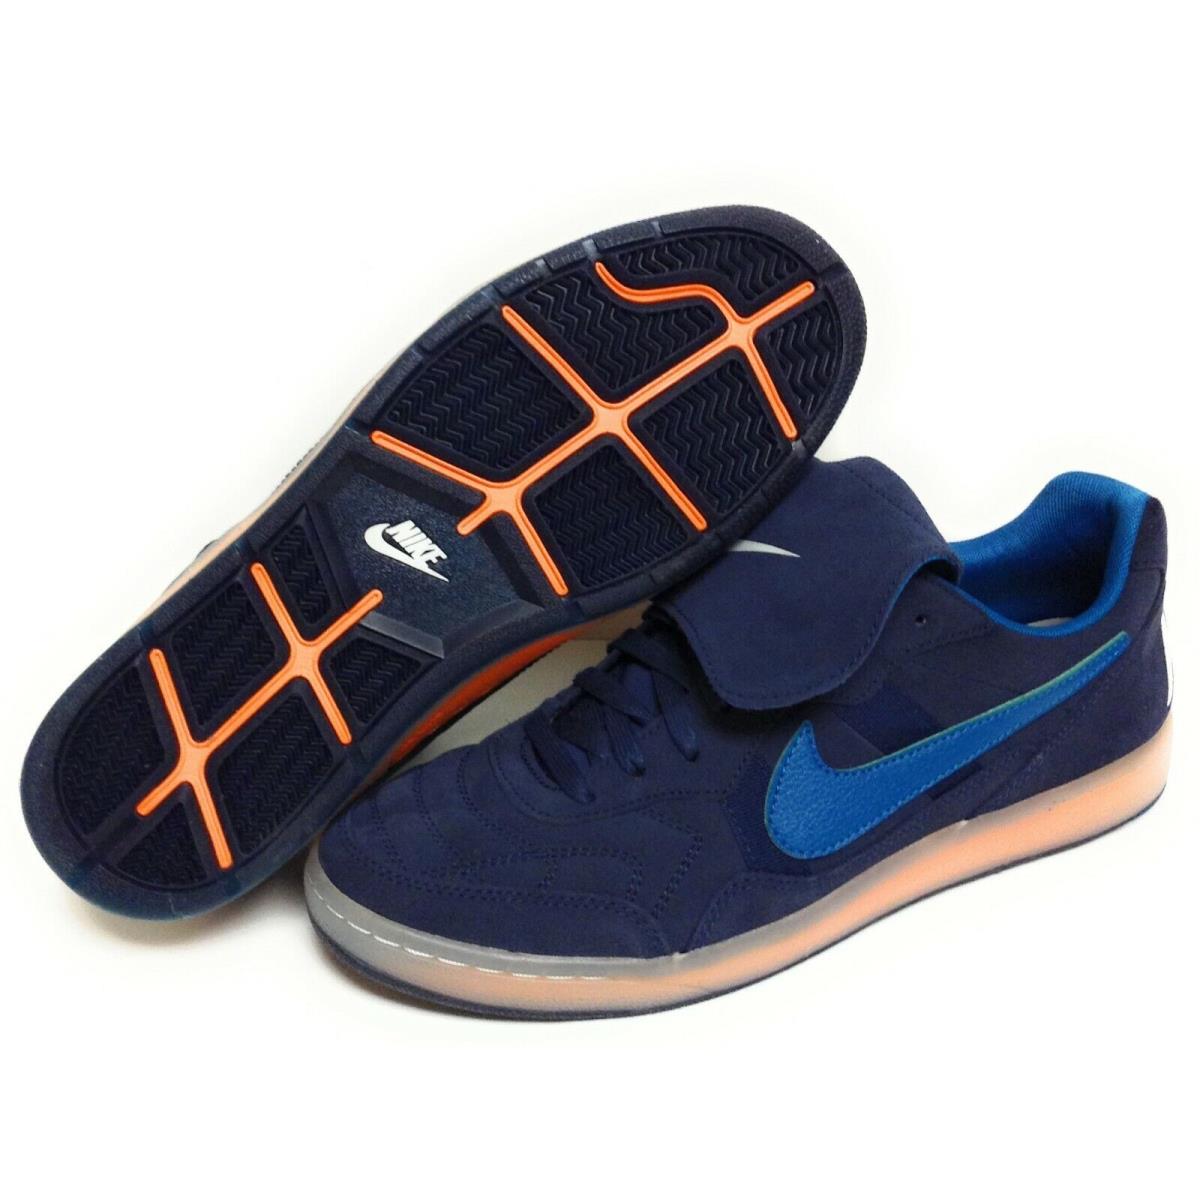 Mens Nike Nsw Tiempo `94 631689 448 Obsidian Blue 2012 Deadstock Sneakers Shoes - Blue, Manufacturer: